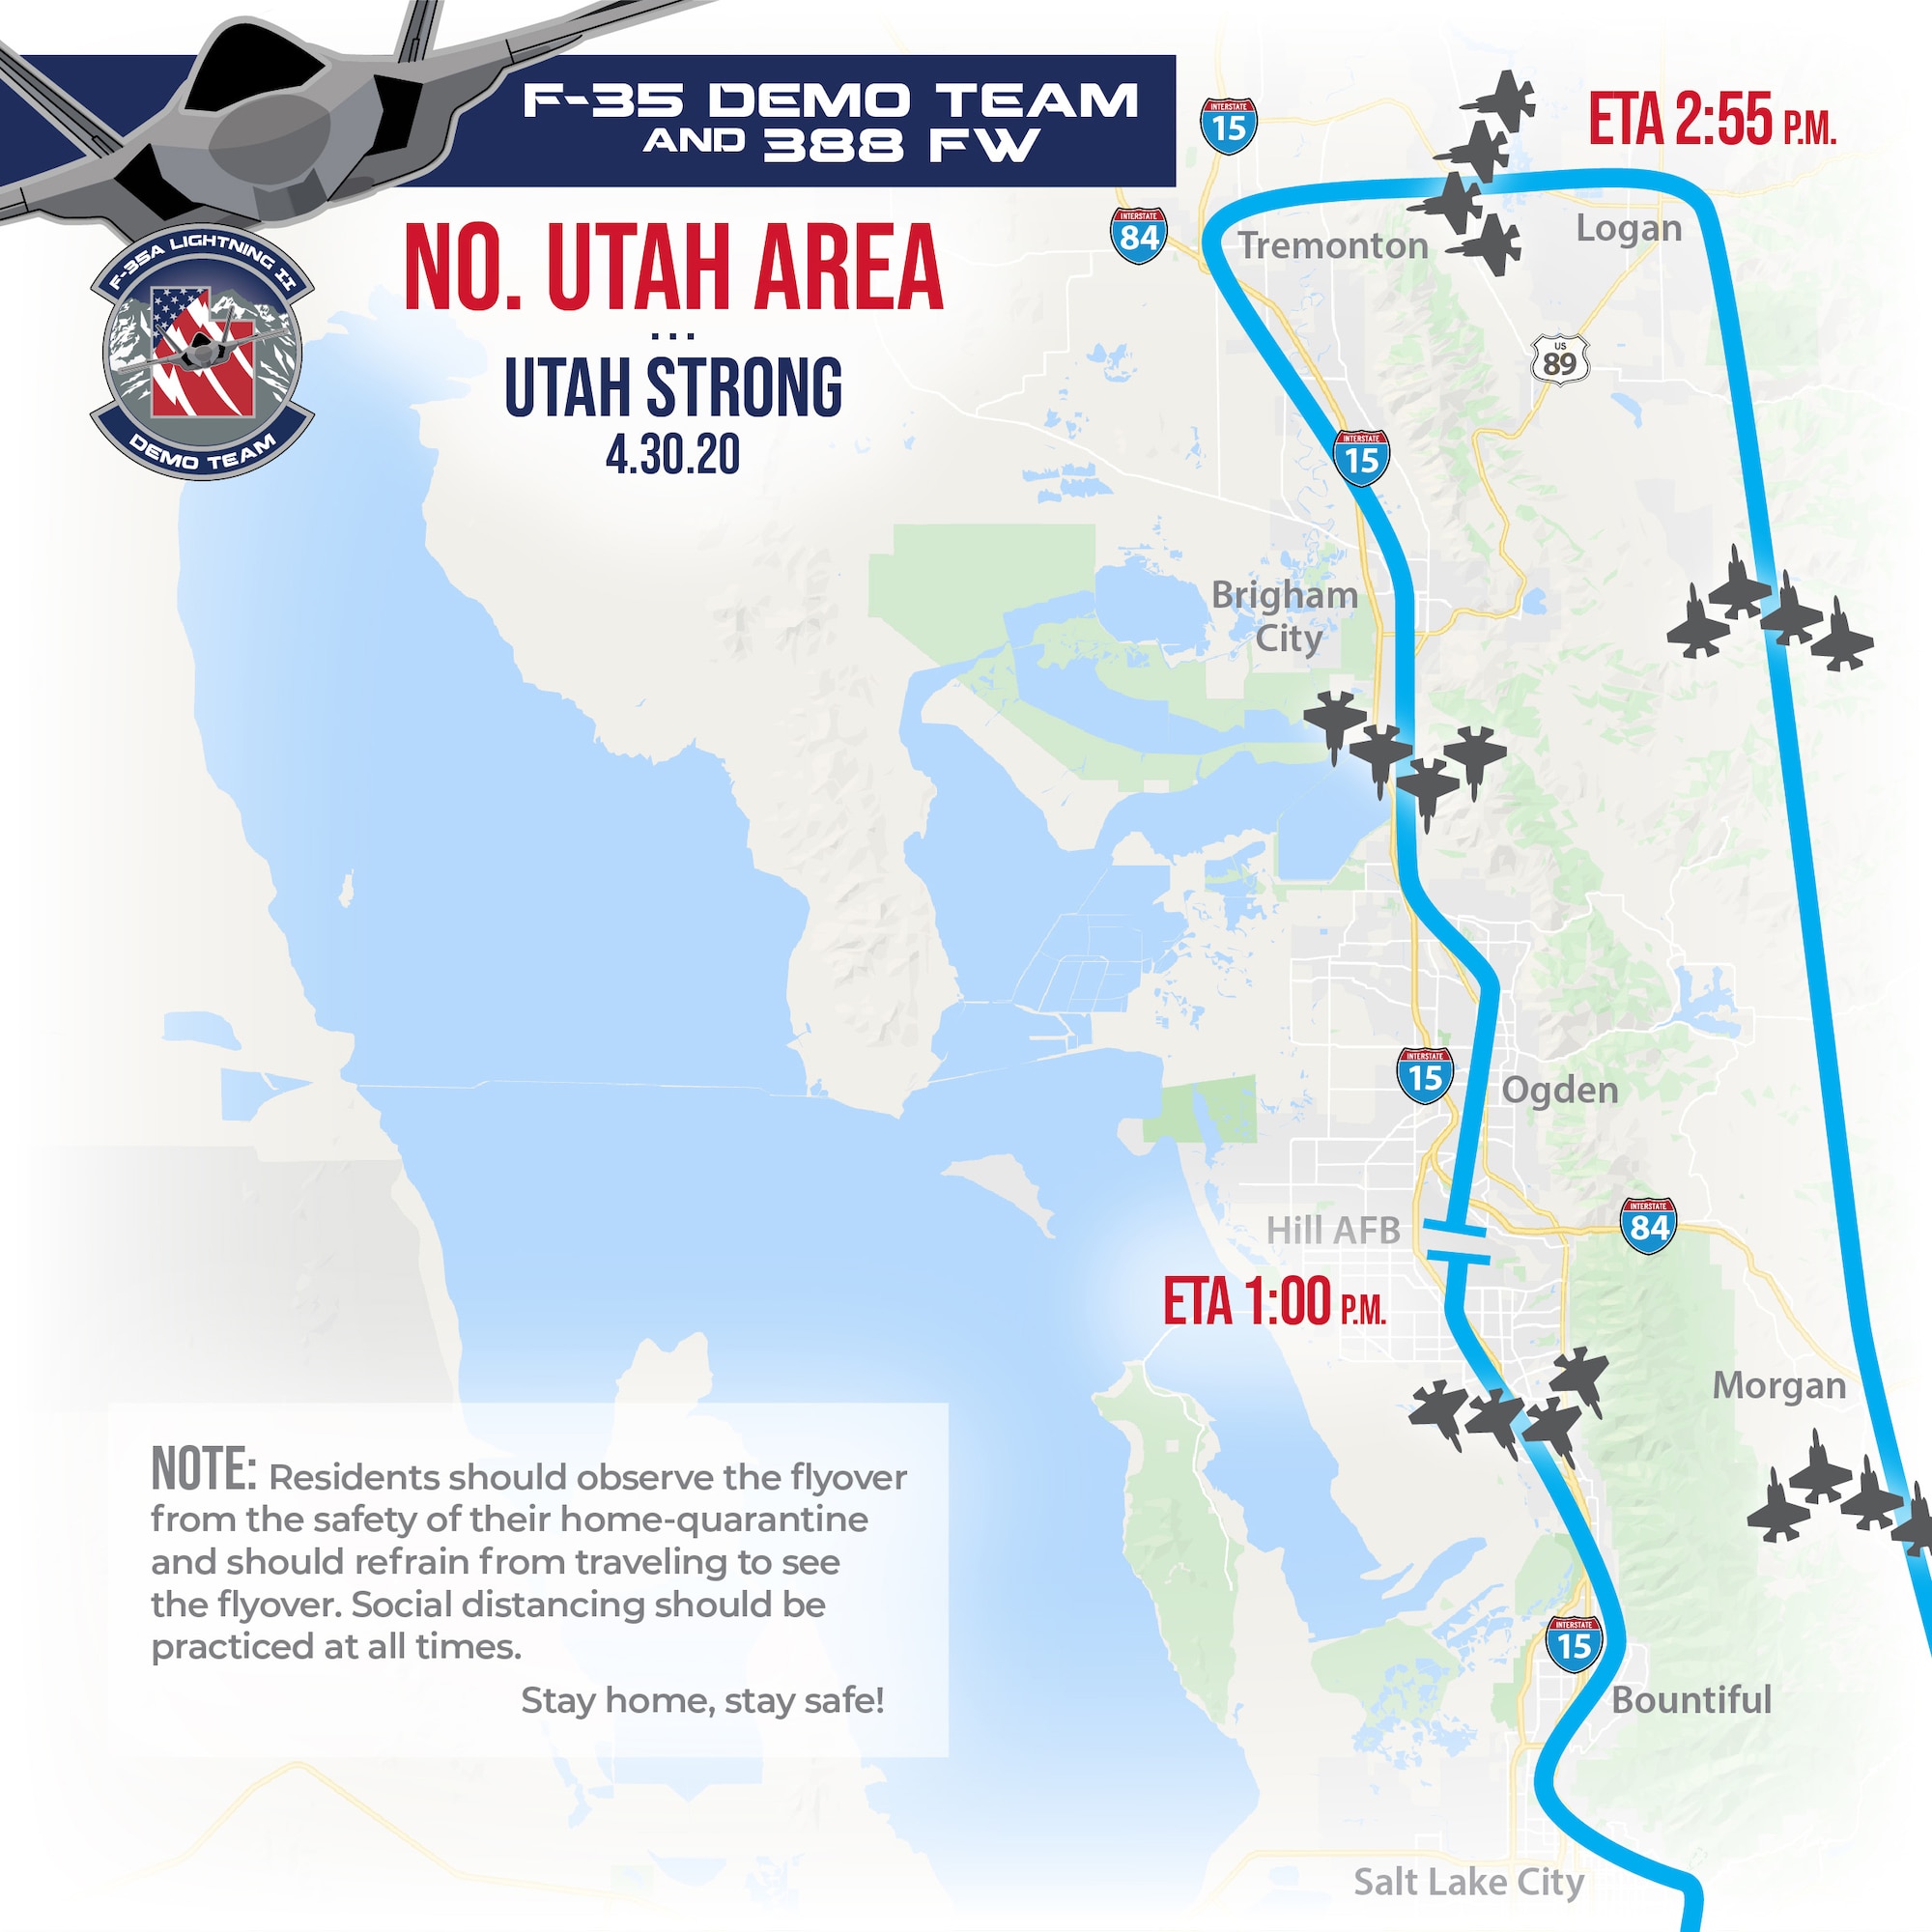 A graphic of the Utah Strong Flyover route